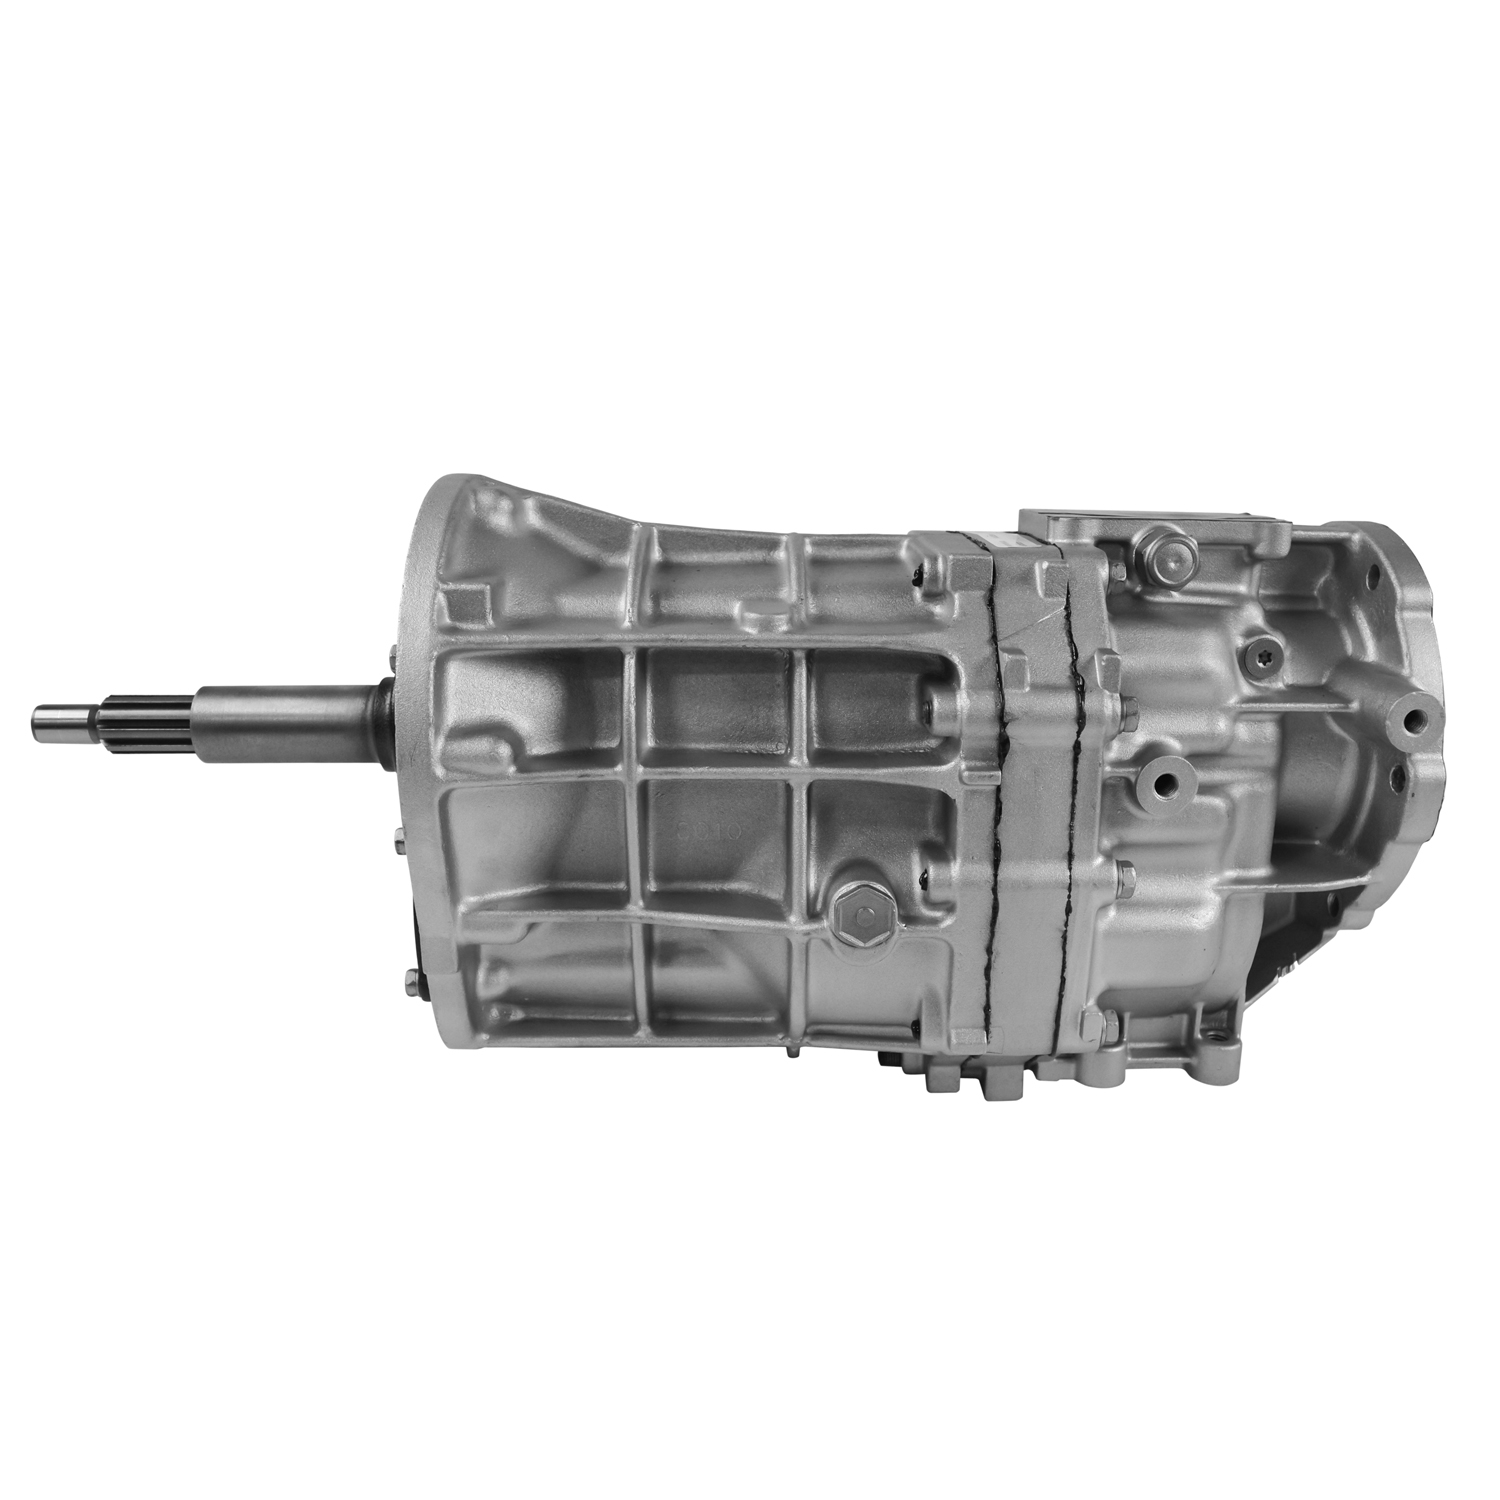 AX15 Manual Transmission for Jeep 97-99 Wrangler, 5 Speed